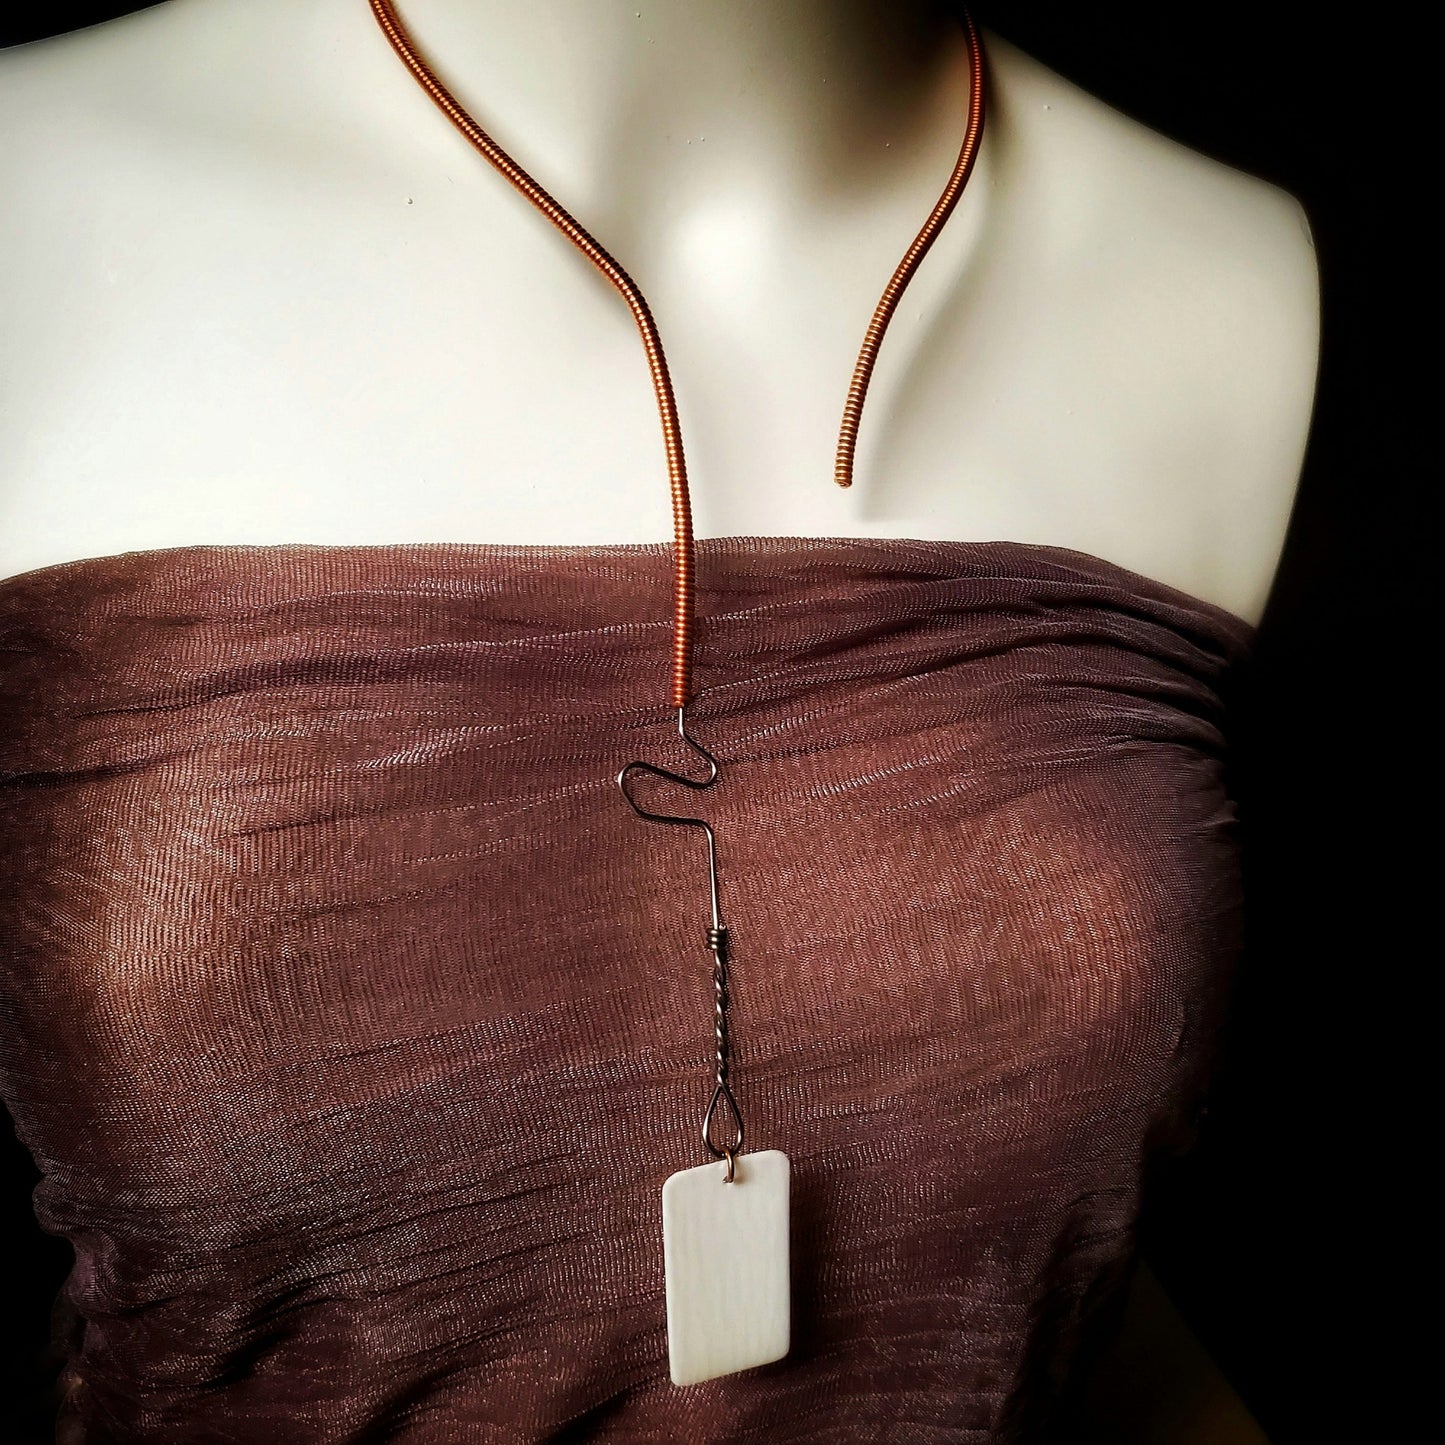 necklace made from an upcycled piano string and an ivory piano key topper - the necklace hangs a white mannequin bust wearing a copper coloured tank style top